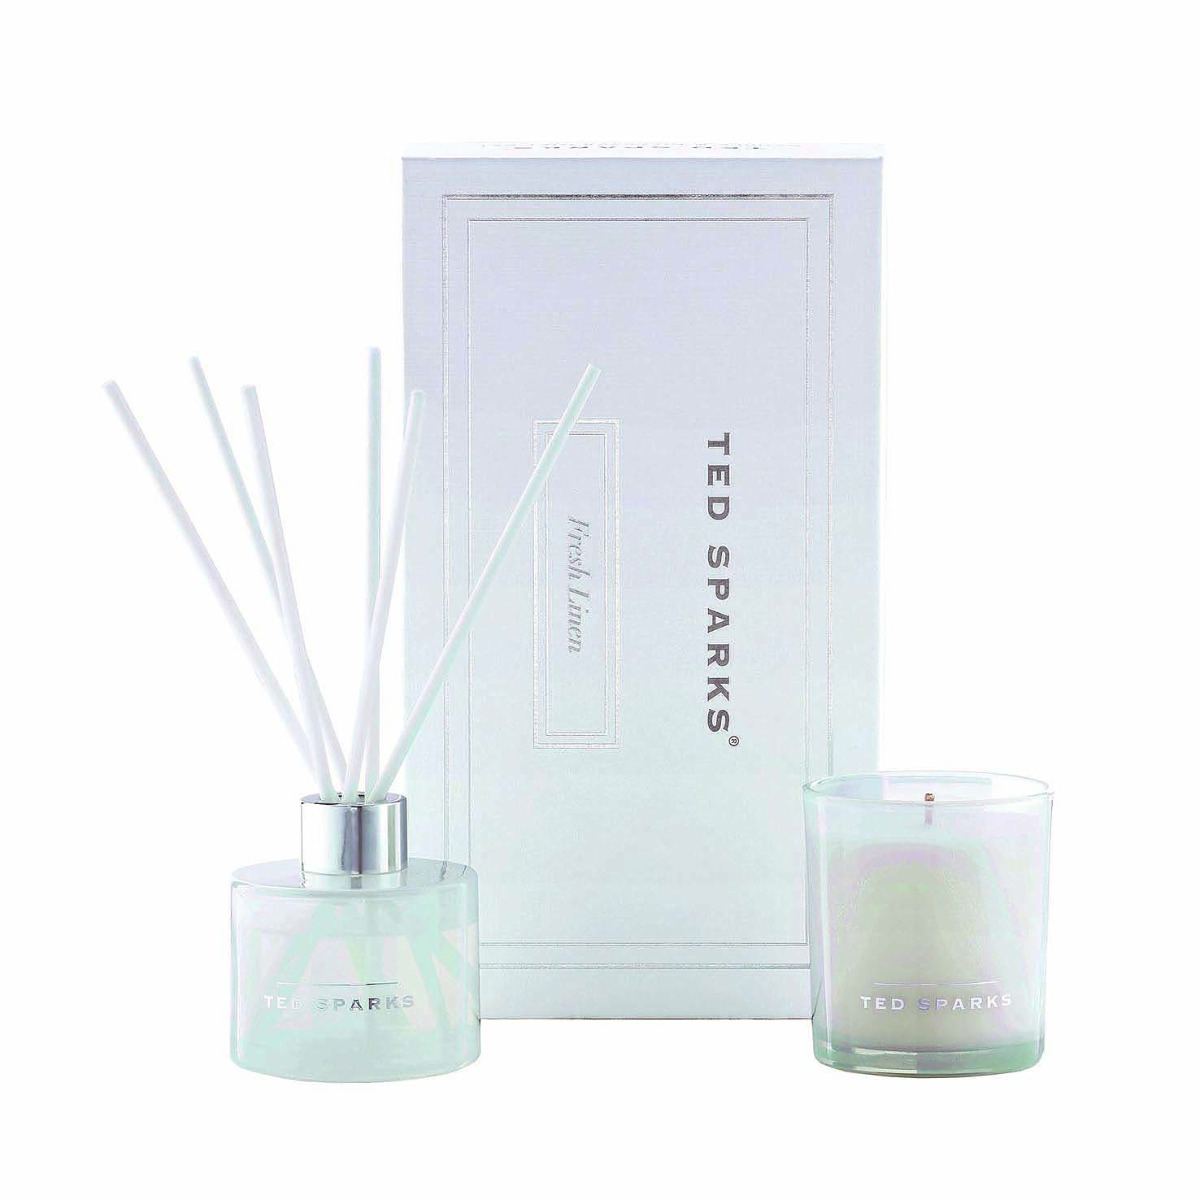 Ted Sparks Candle & Diffuser Gift Set - Personalisation with a full colour print and sleeve